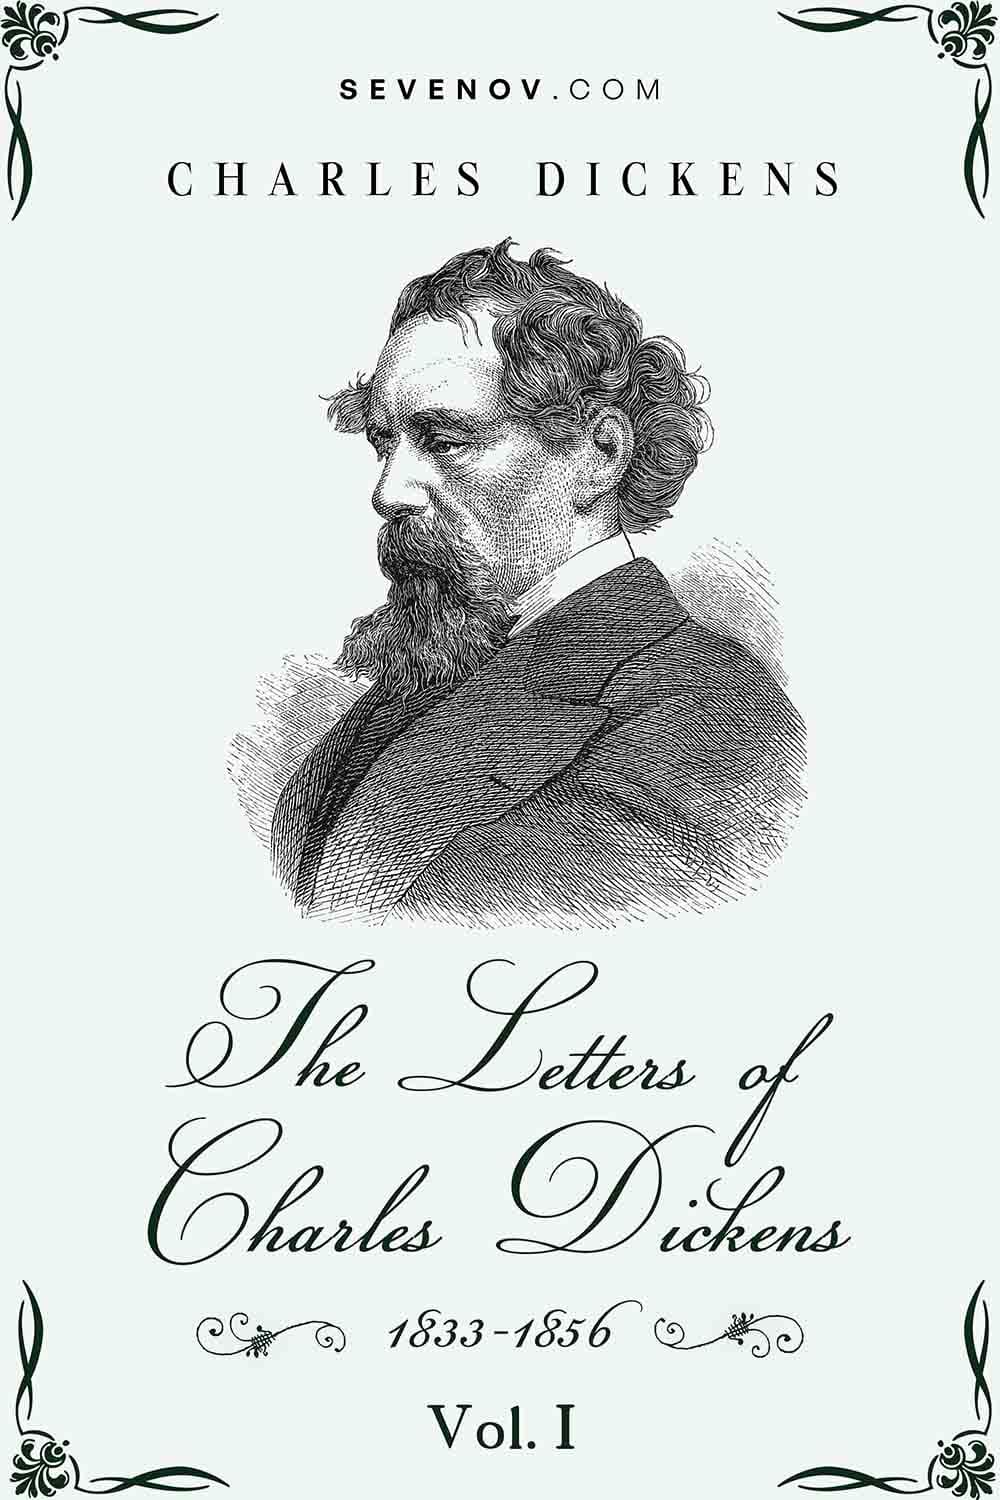 https://pagevio.com/wp-content/uploads/2023/01/the-letters-of-charles-dickens-vol-1-1833-1856-20220901.jpg